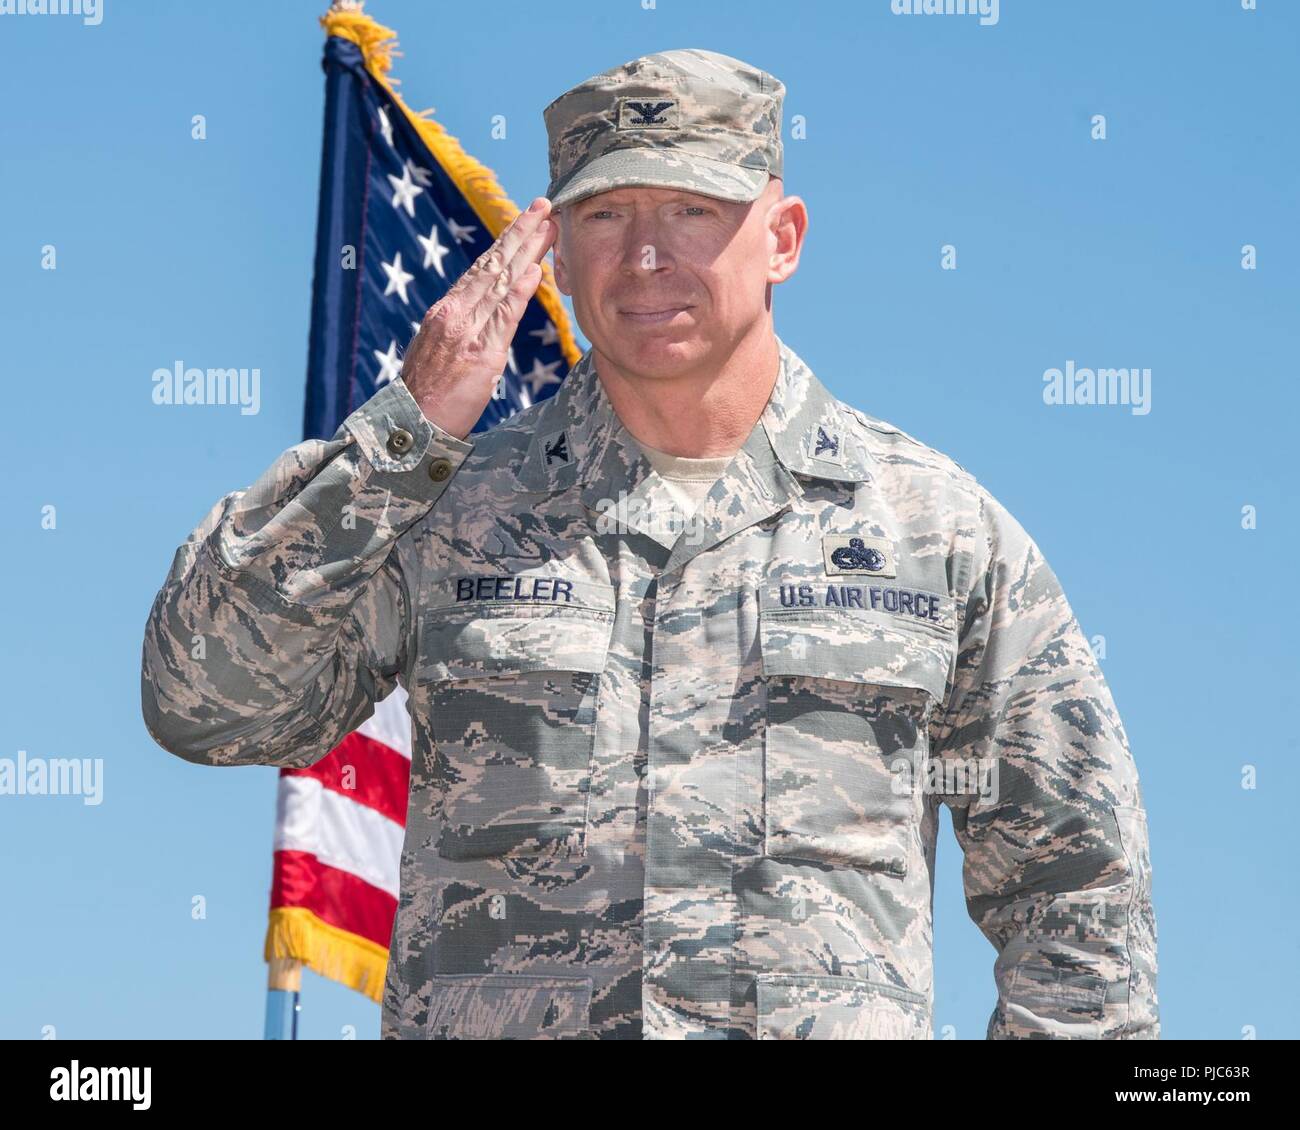 U.S. Air Force Col. Victor Beeler, 60th Mission Support Group commander receives his first salute during the Change of Command ceremony at Travis Air Force Base, Calif., July 16, 2018. Col. Ethan Griffin, 60th Air Mobility Wing commander was the presiding officer for the Change of Command Ceremony. Stock Photo